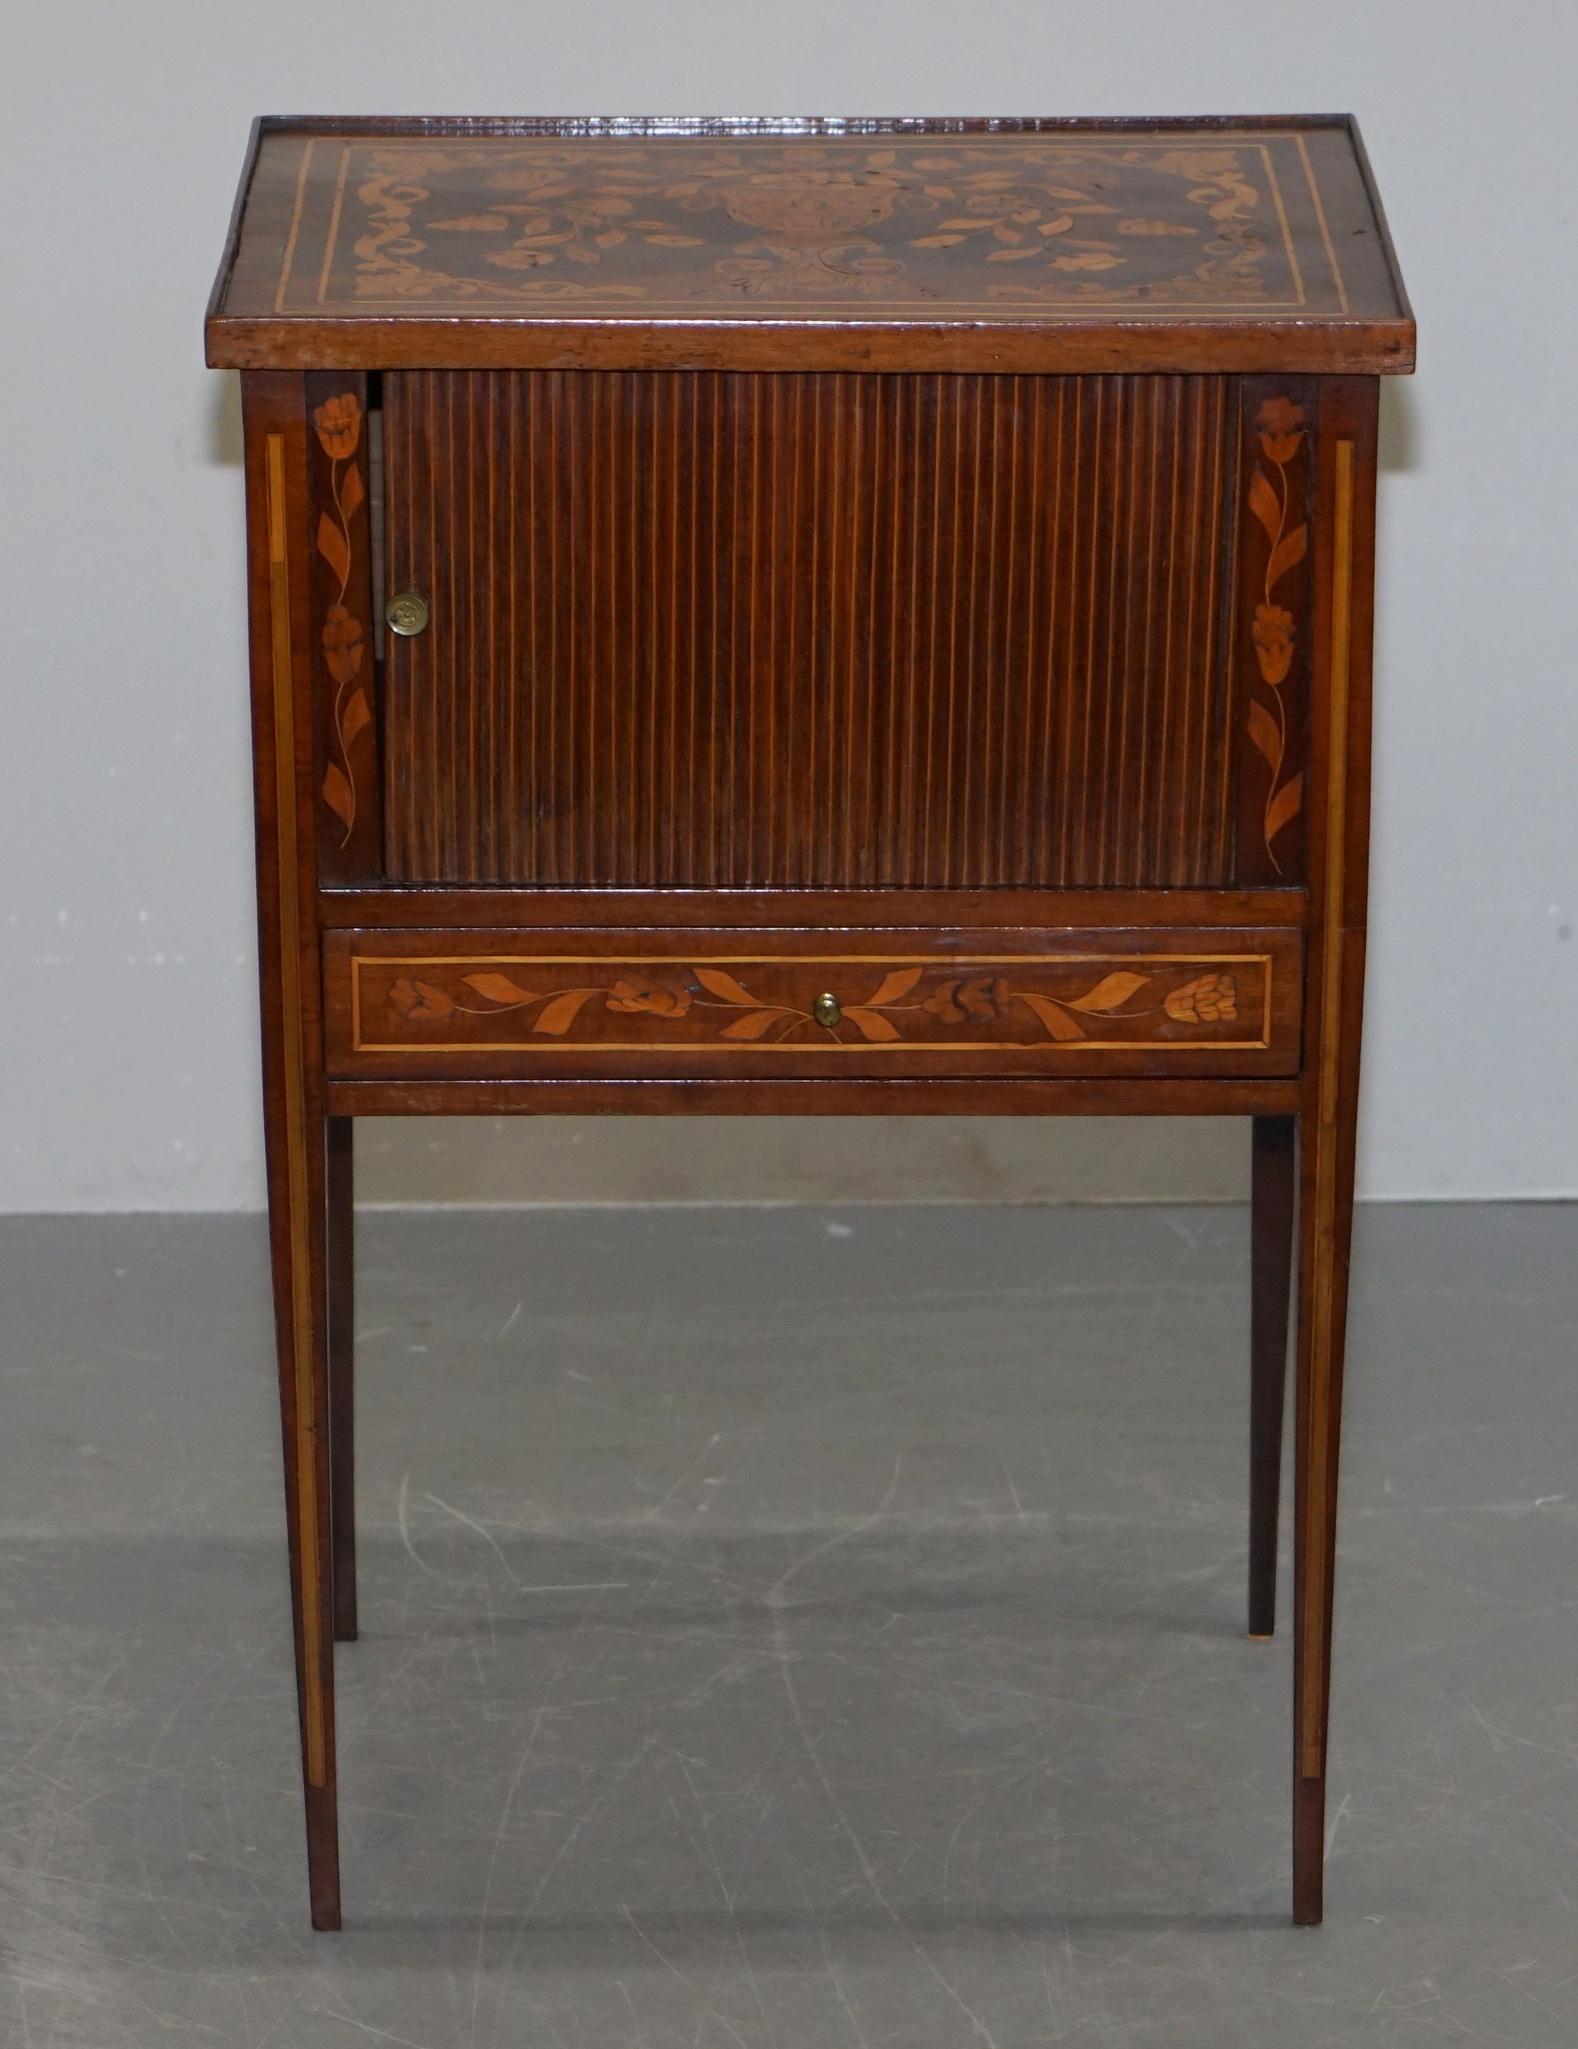 Regency Rare 19th Century Dutch Marquetry Inlaid Side Table with Tambour Fronted Door For Sale